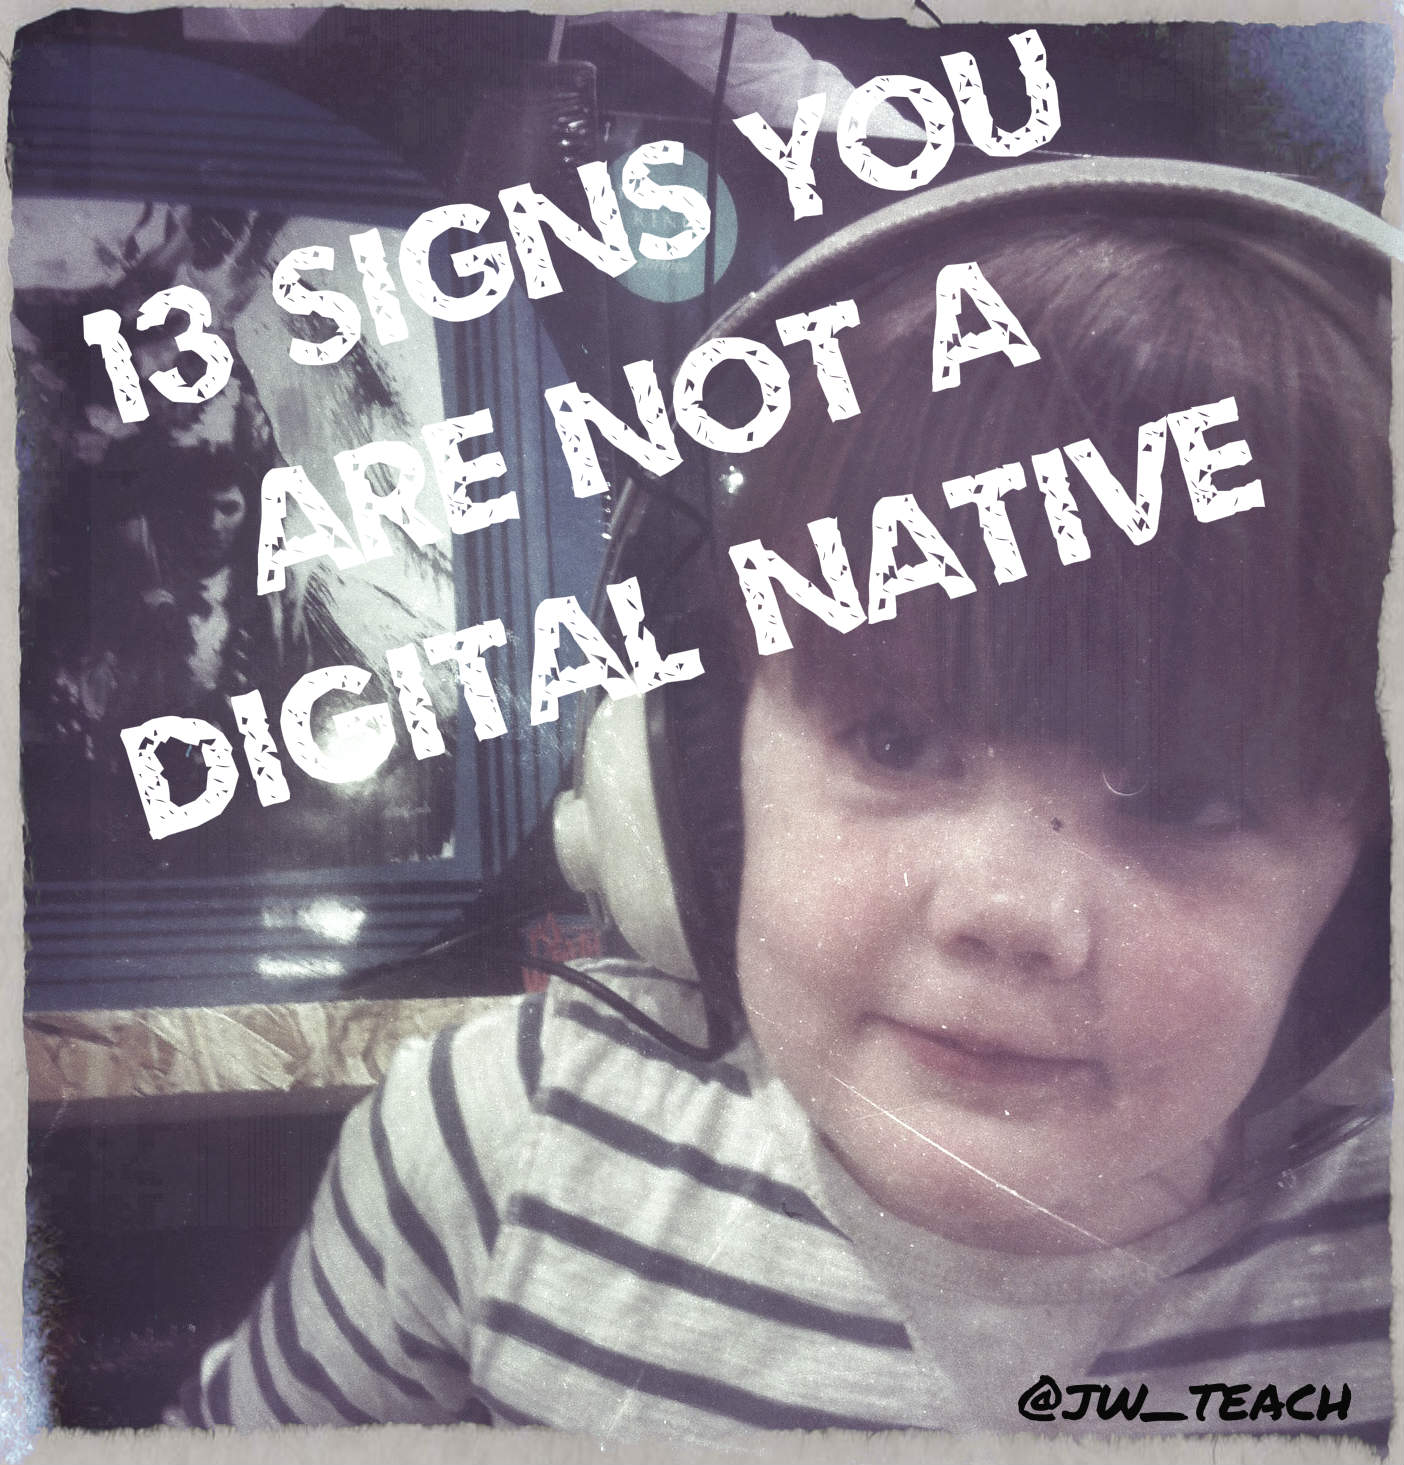 13 Signs you are not a Digital Native.